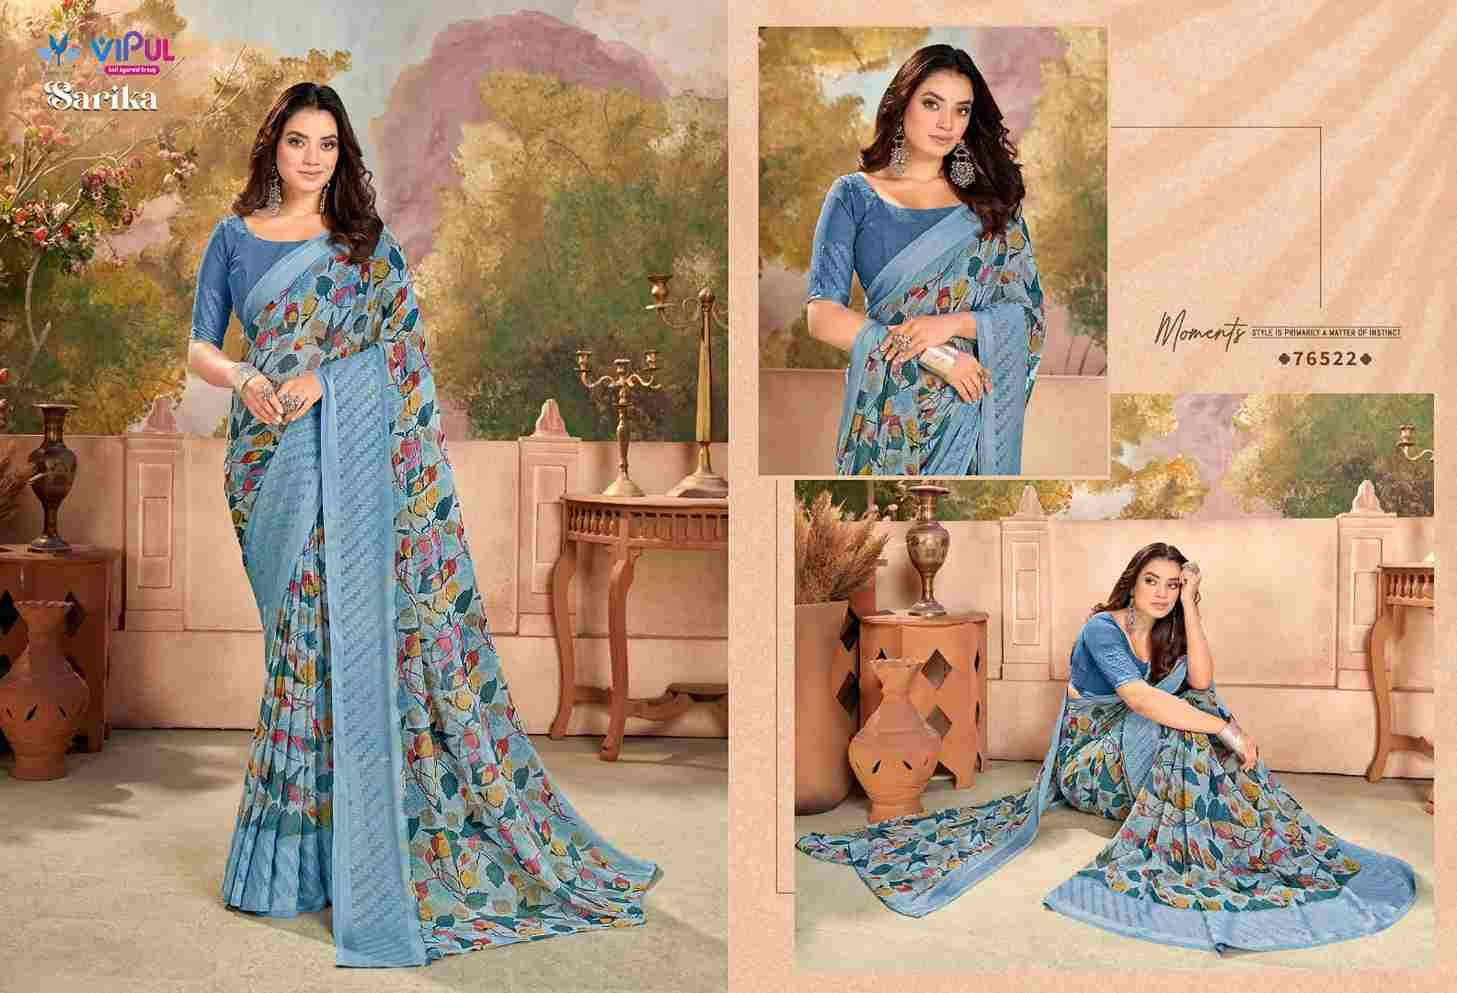 Sarika By Vipul Fashion 76518 To 76529 Series Indian Traditional Wear Collection Beautiful Stylish Fancy Colorful Party Wear & Occasional Wear Georgette Sarees At Wholesale Price